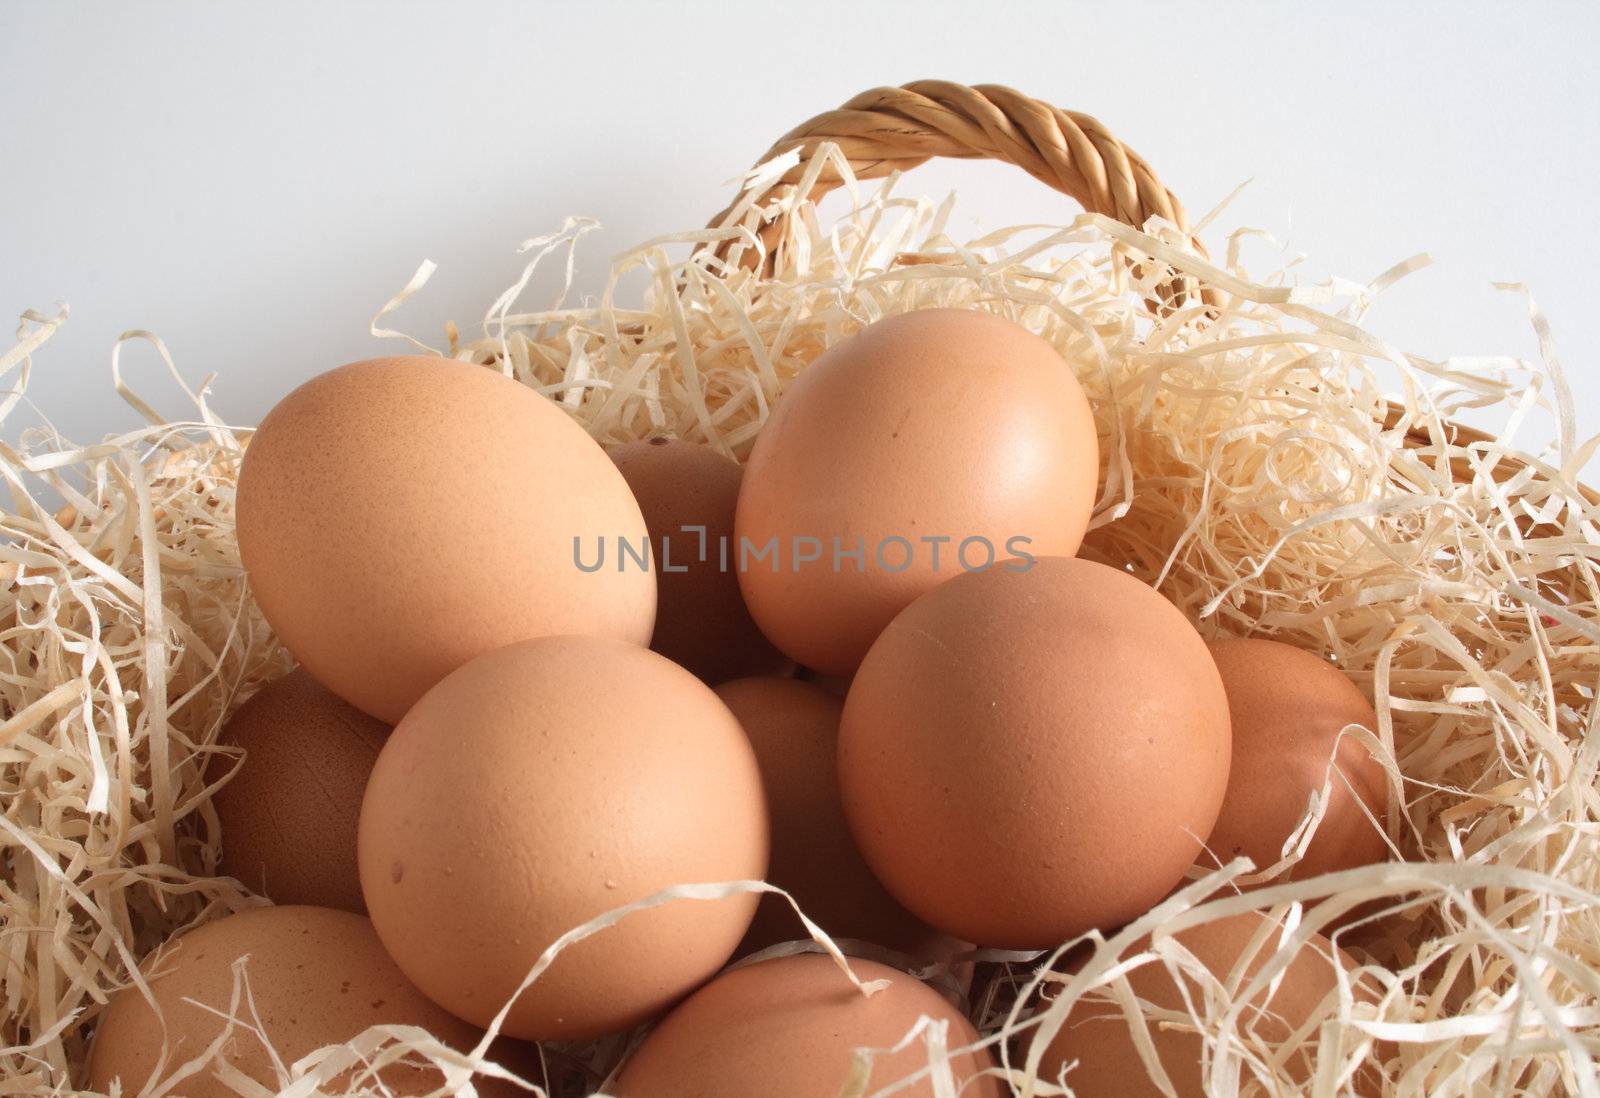 clutch of eggs in a basket filled with shavings